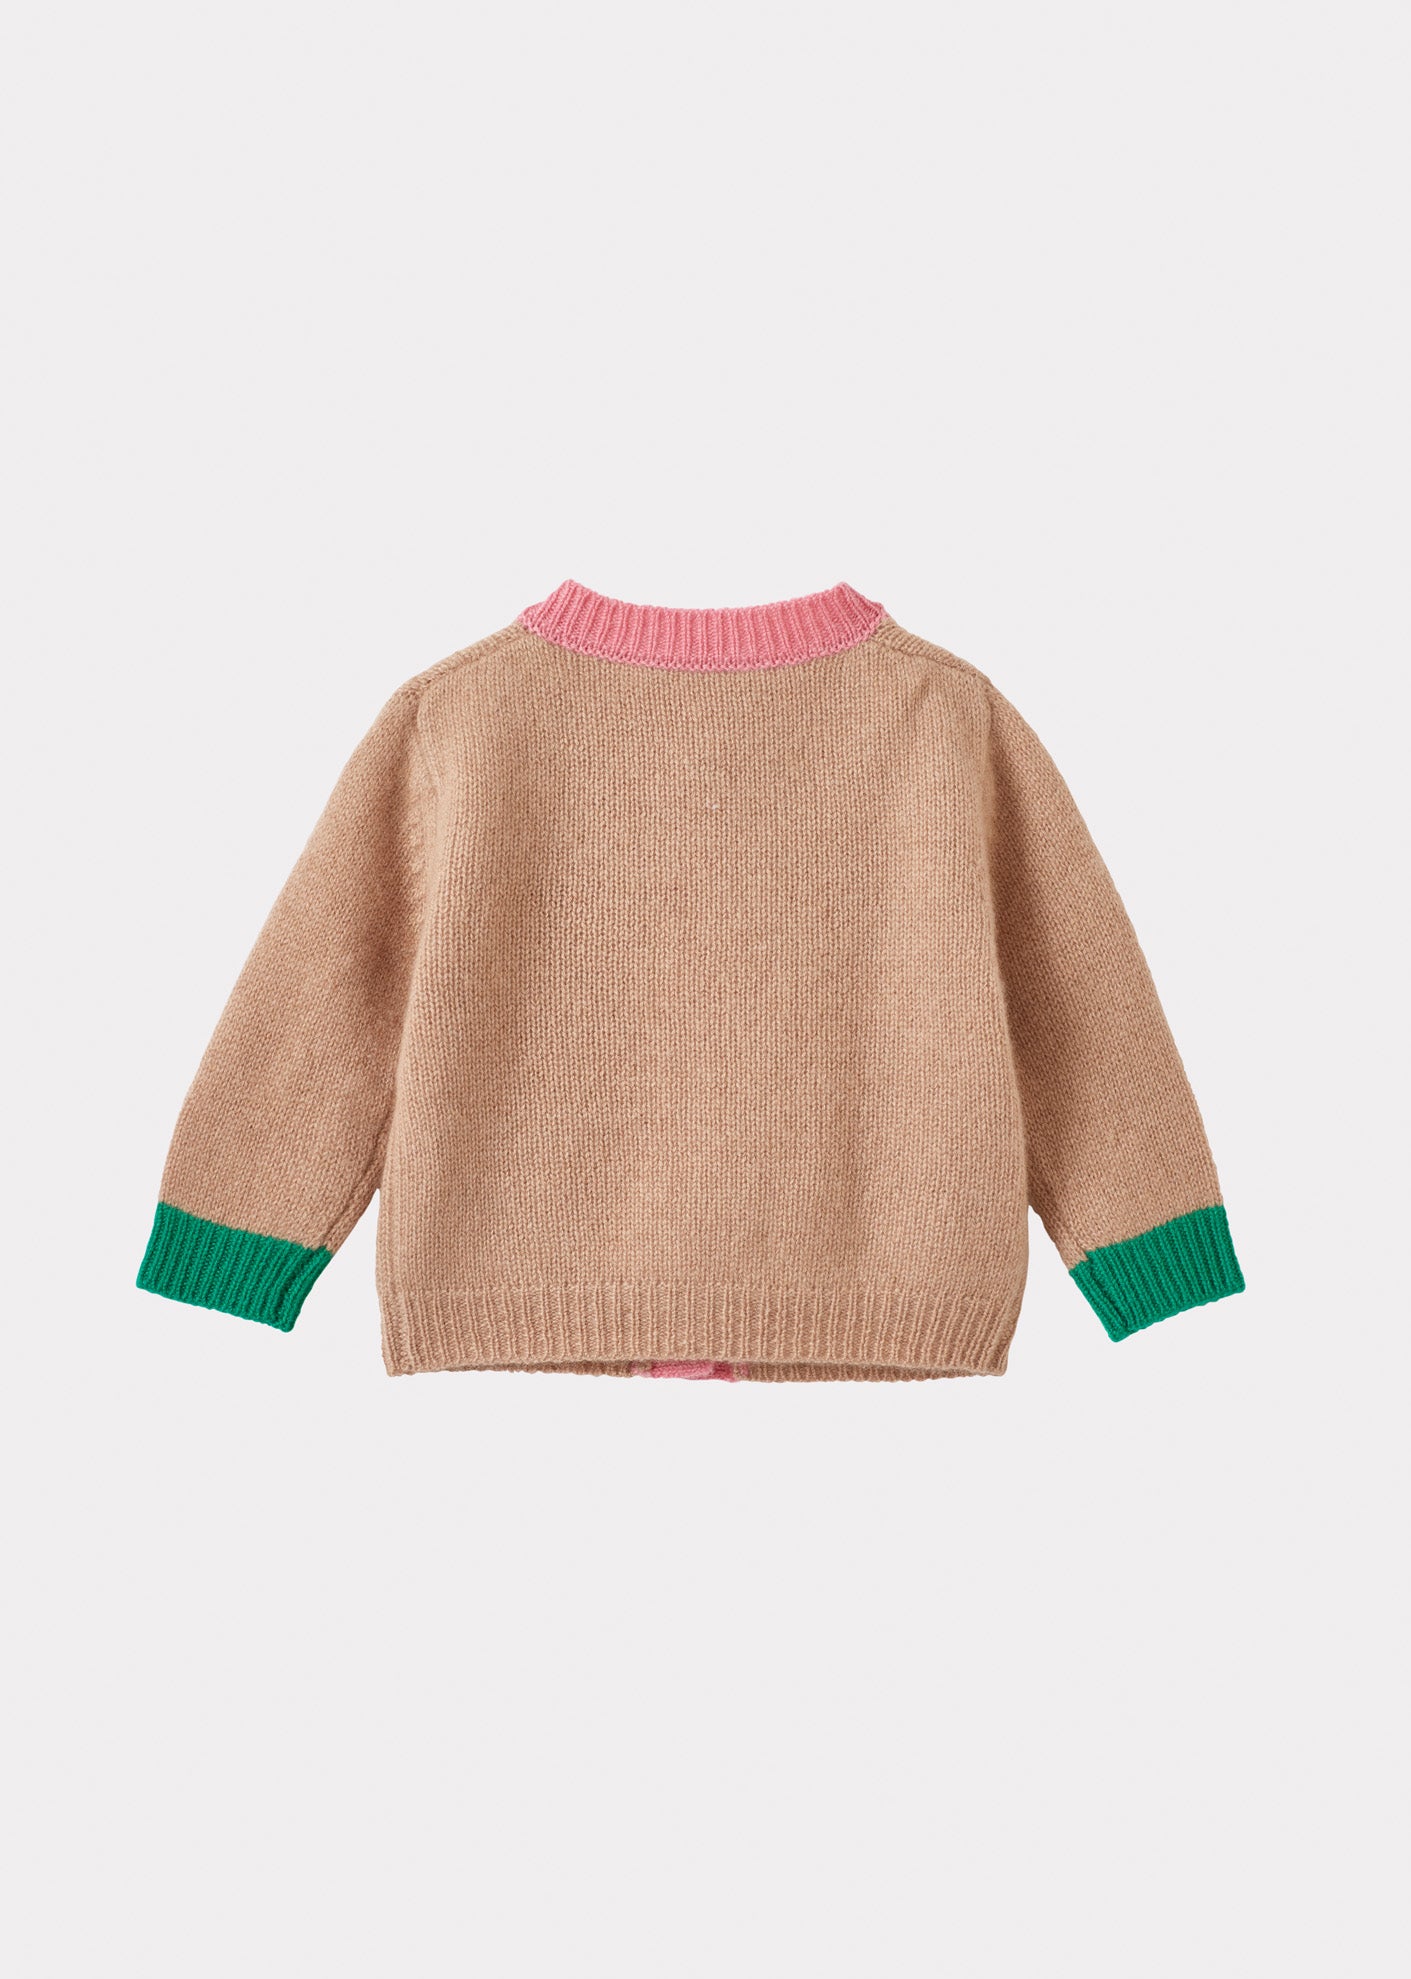 ANISE BABY CARDIGAN - CAMEL/PINK